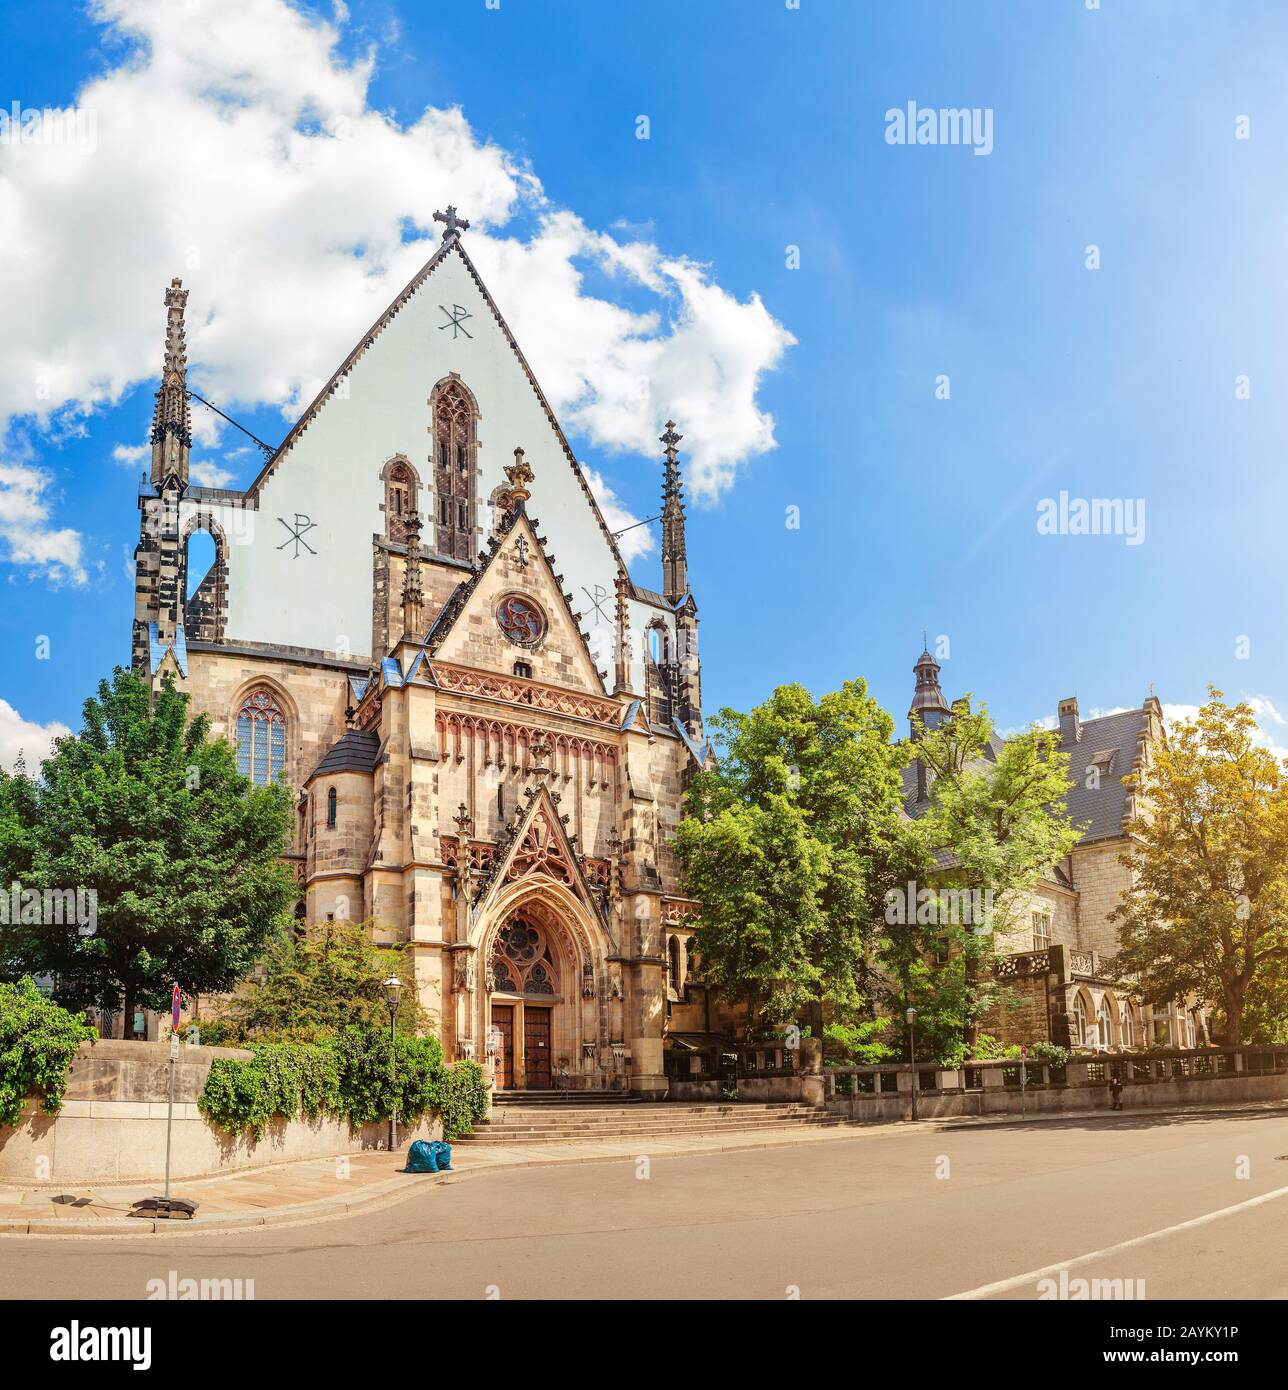 Panoramic view of Architecture and Facade of St. Thomas Church (Thomaskirche) in Leipzig, Germany. Travel tourist and religious destination in Europe Stock Photo